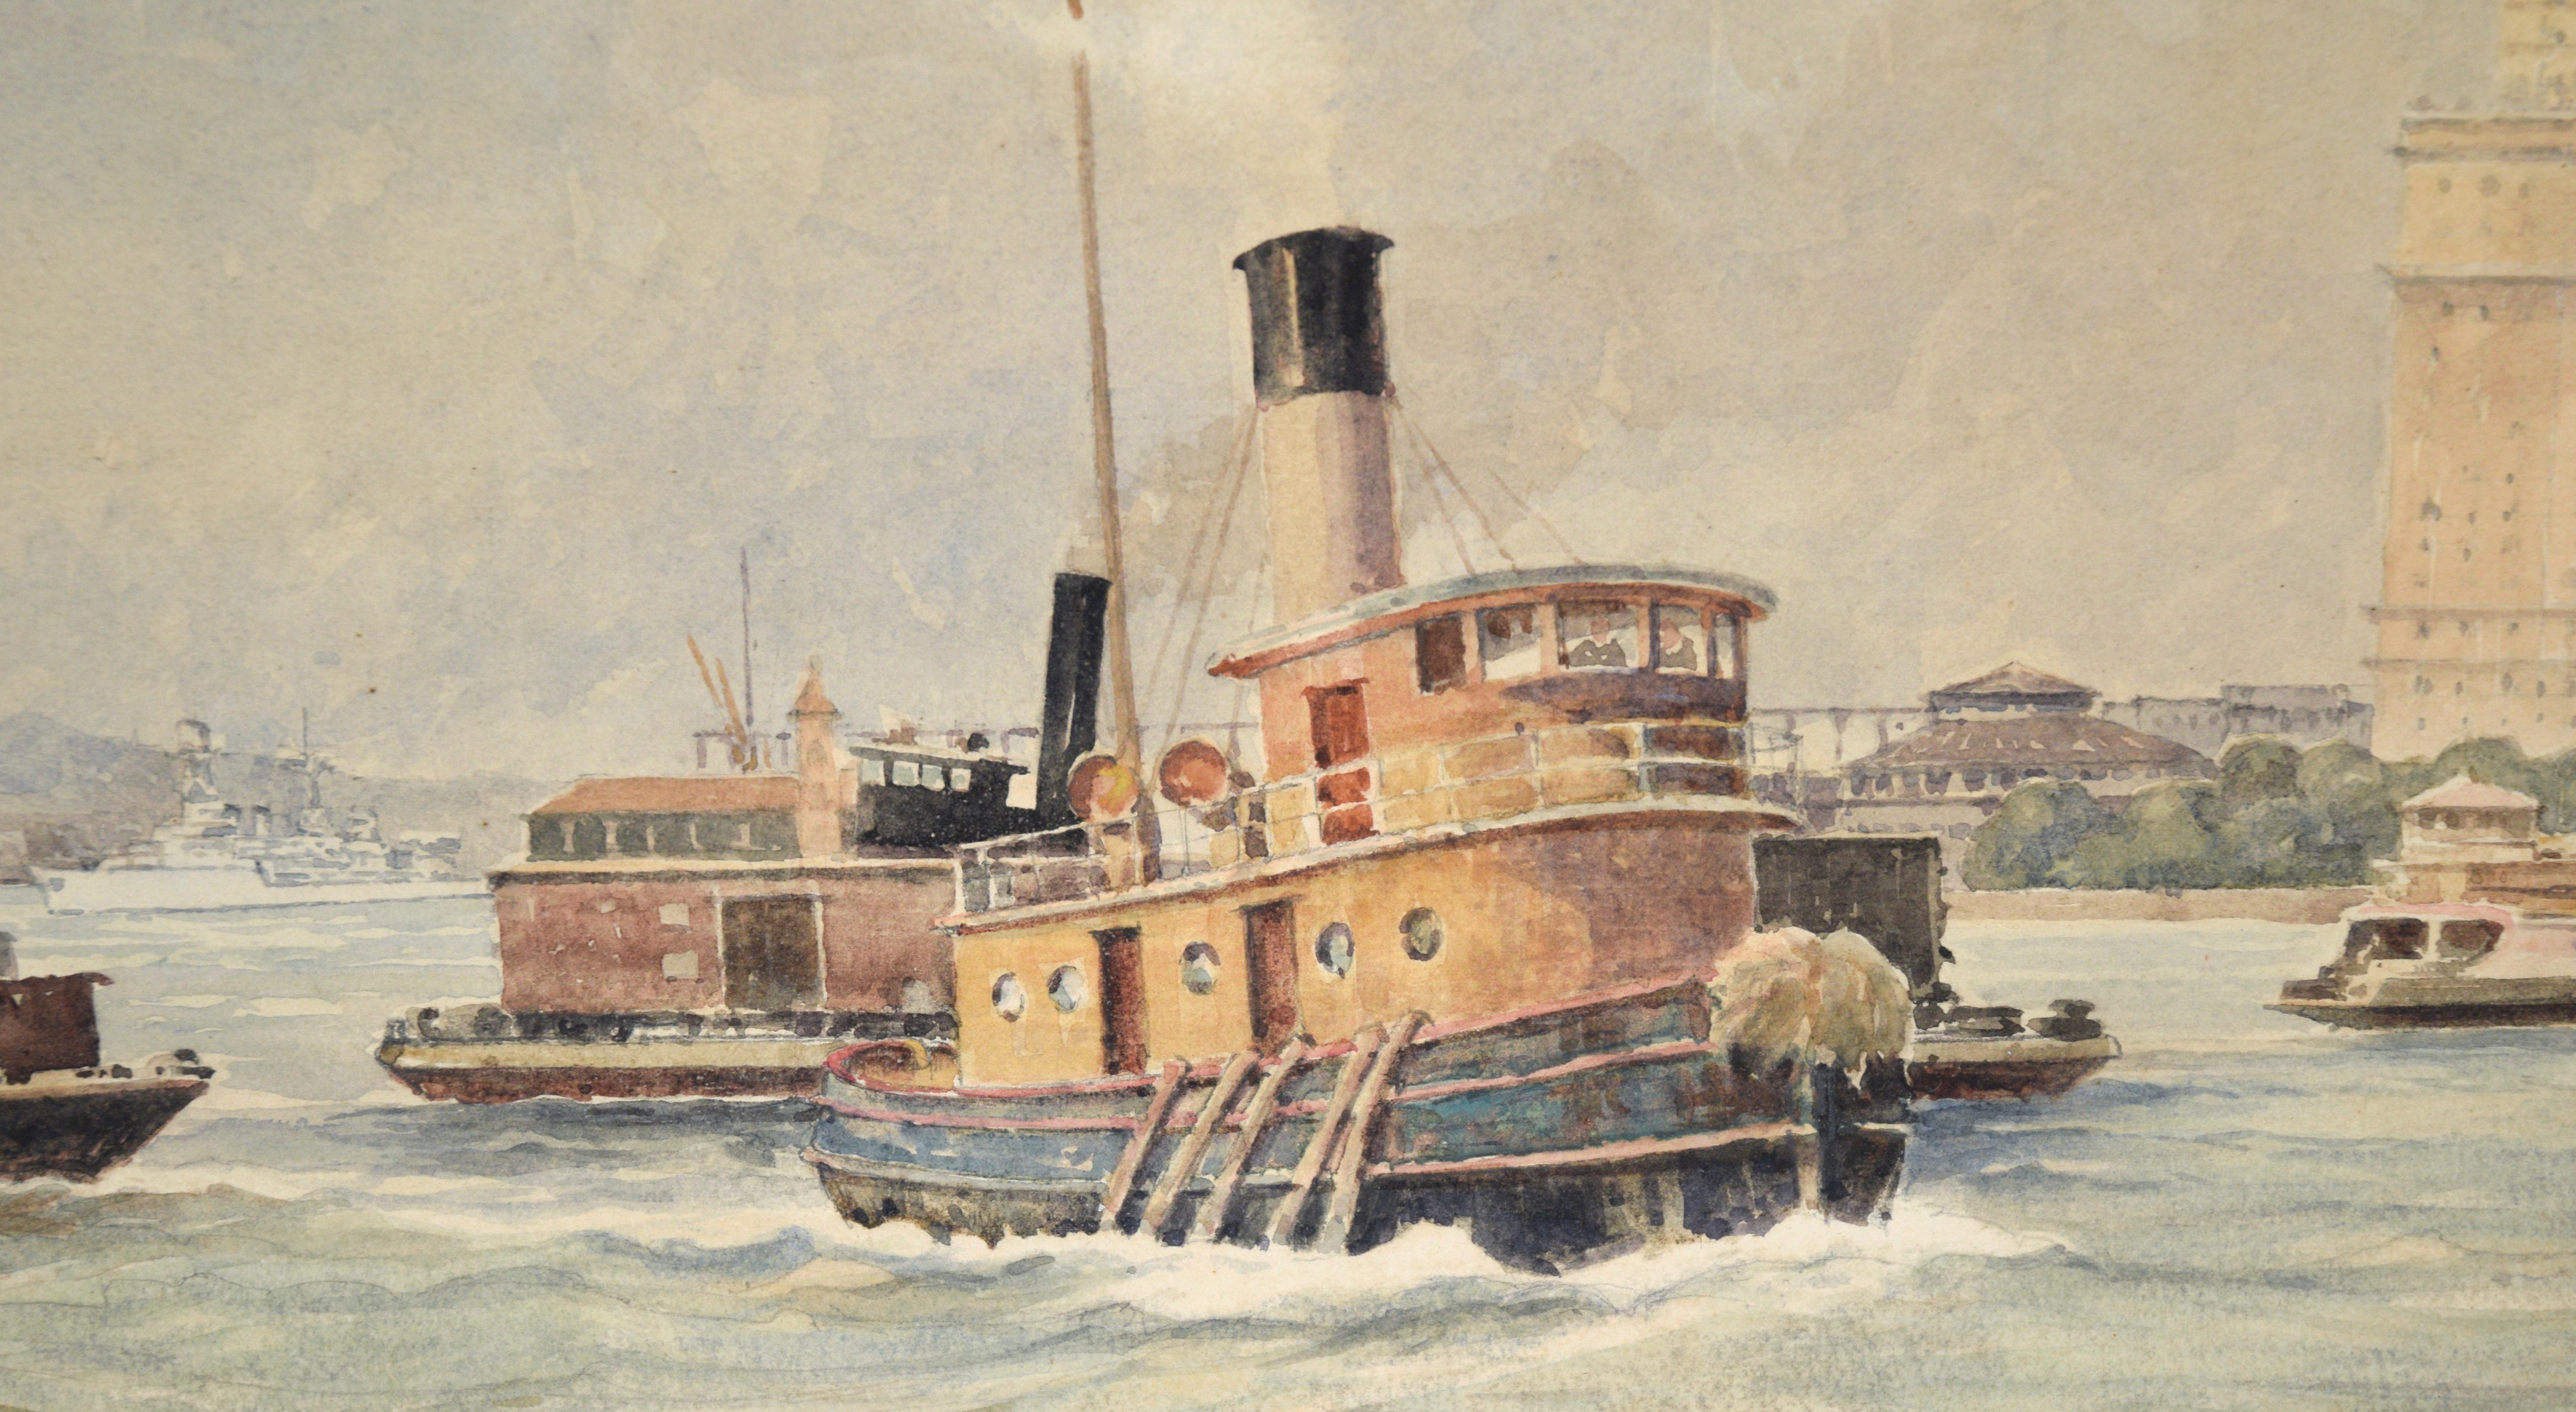 Whitehall Building, July 1939 - Harbor Seascape with Tugboat in Watercolor For Sale 3